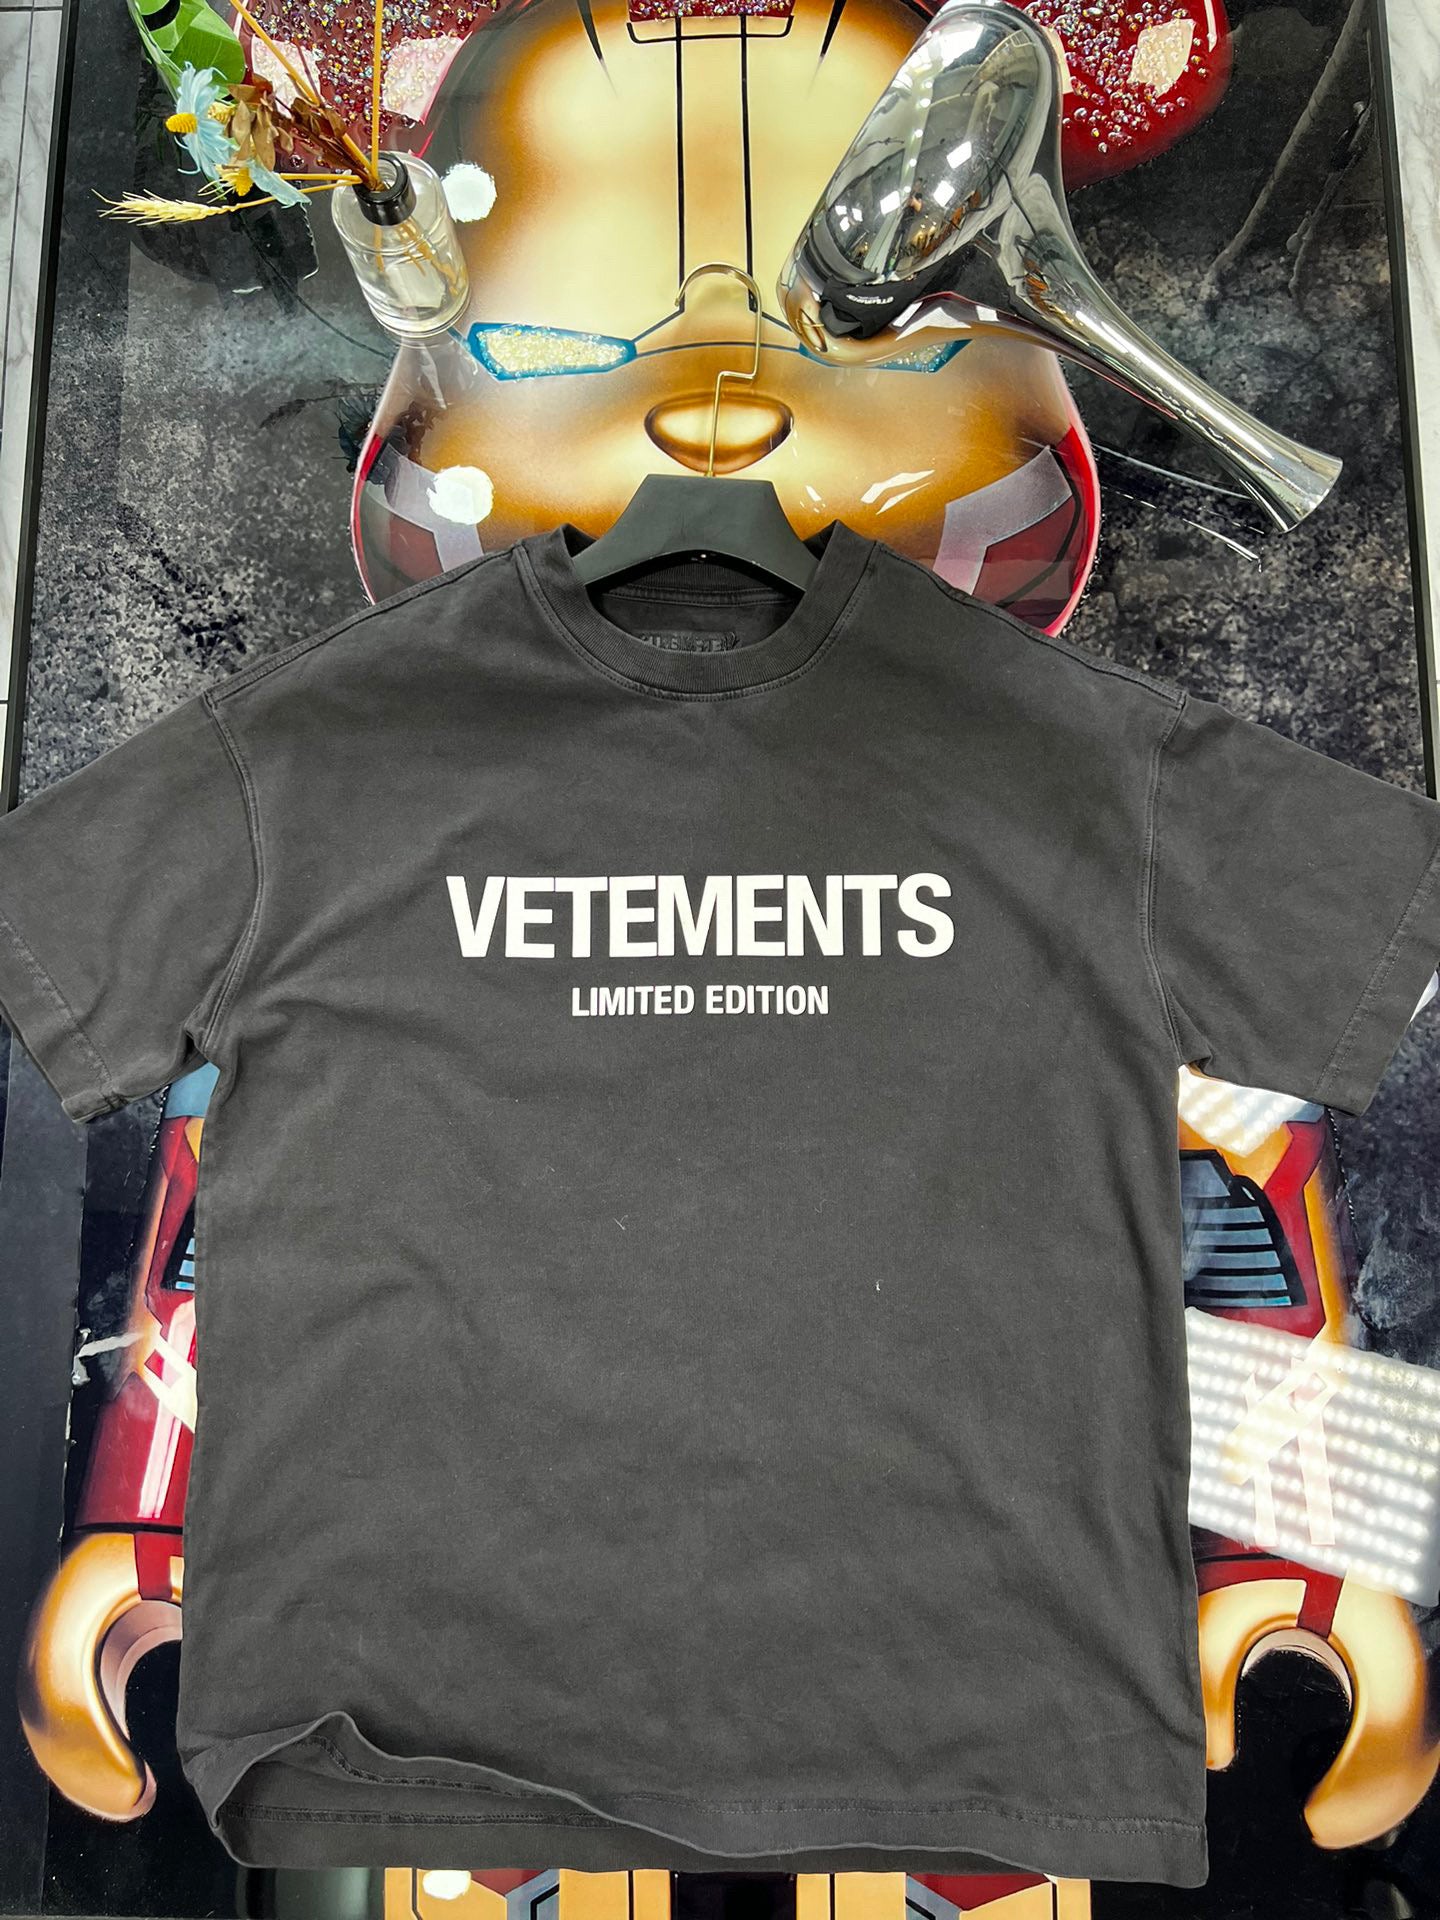 VETEMENTS Limited Edition t-shirt